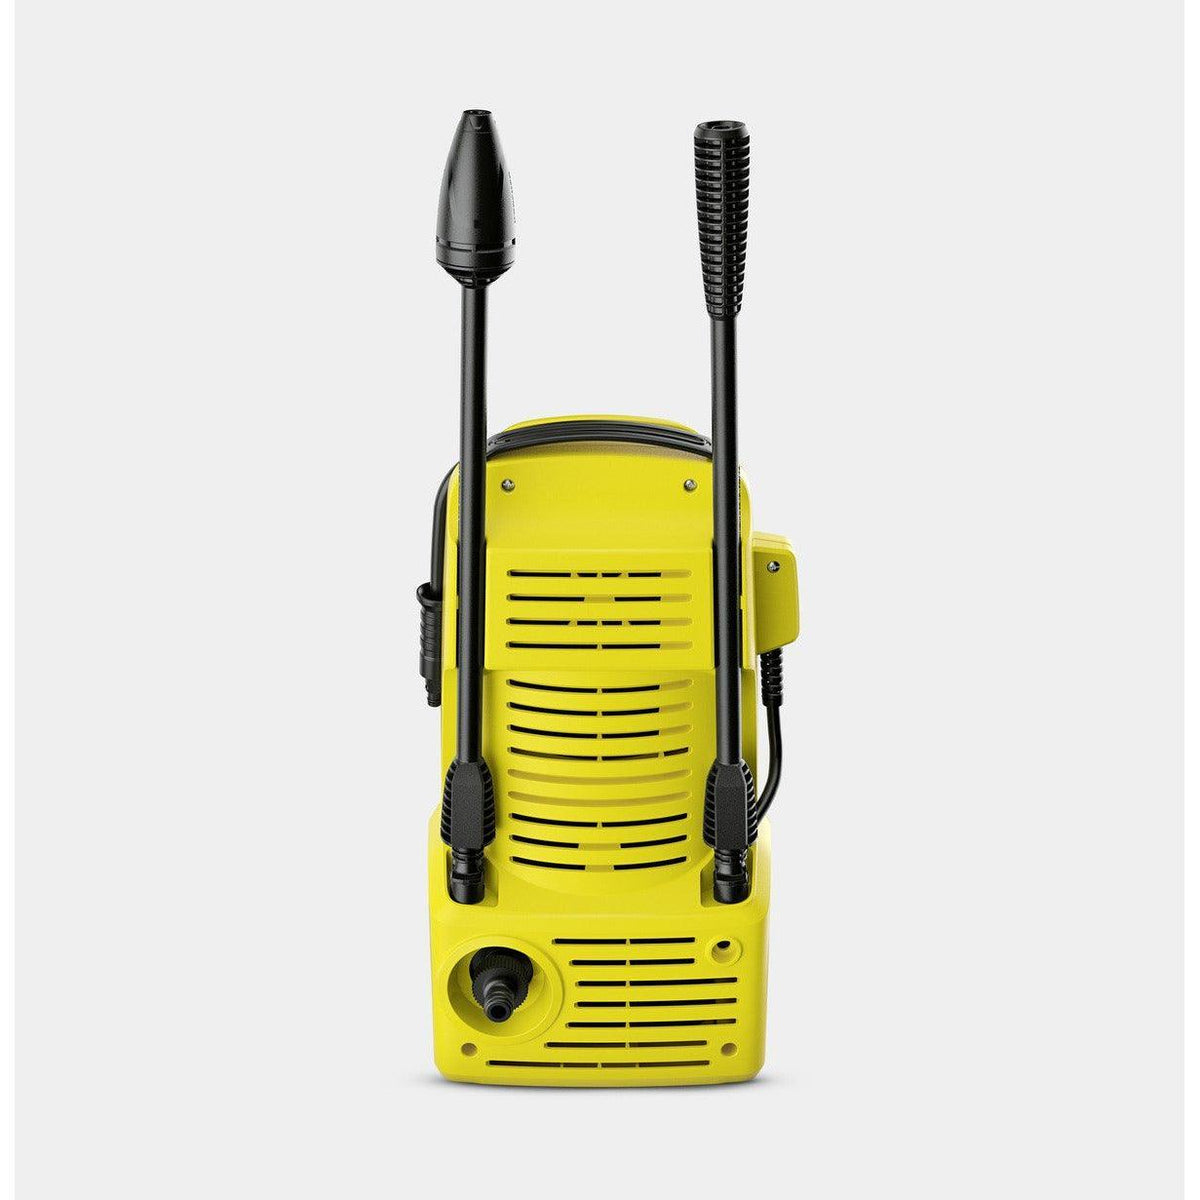 Karcher K 2 Compact Pressure Washer - Yellow | K2COMPACT from DID Electrical - guaranteed Irish, guaranteed quality service. (6977623294140)